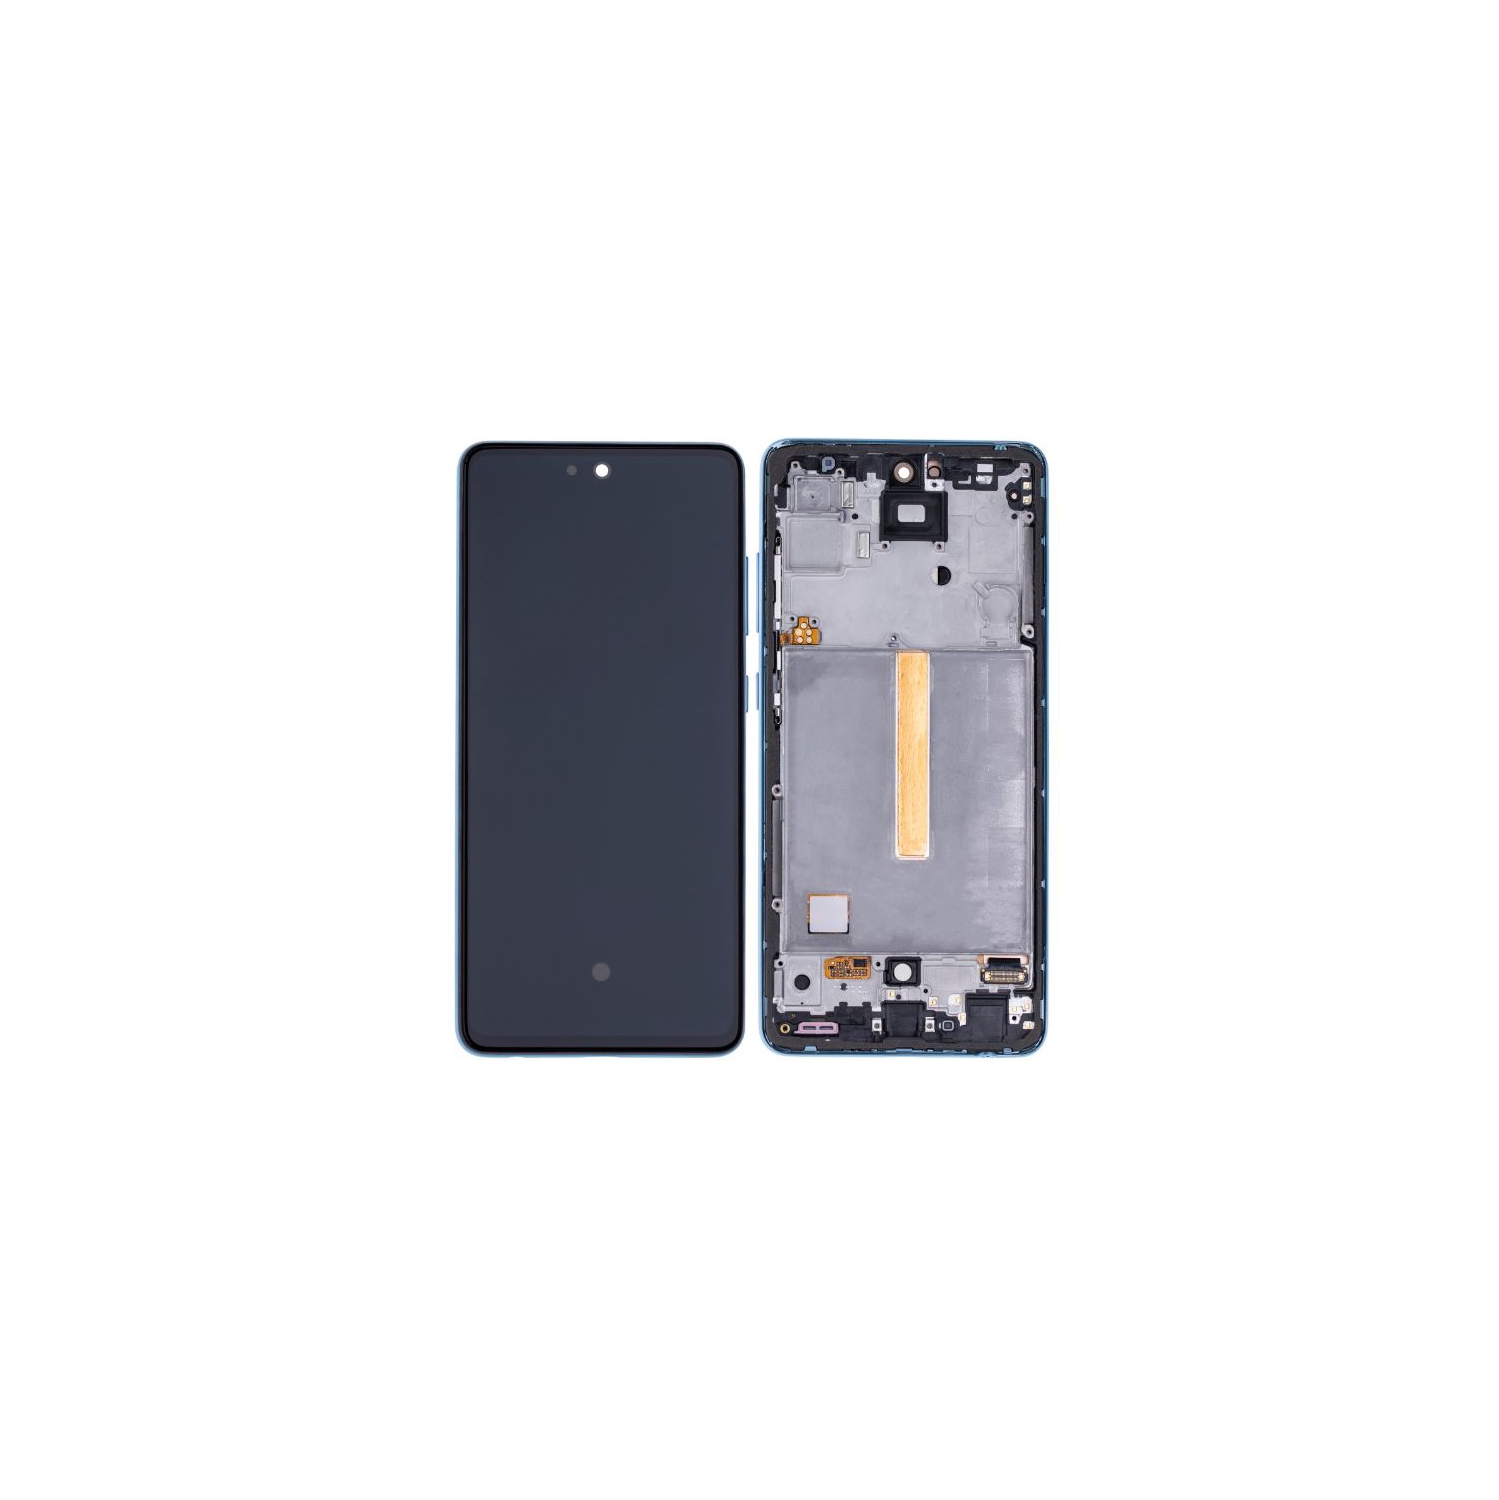 Replacement OLED Assembly With Frame Compatible For Samsung Galaxy A52 4G (A525 / 2021) / 5G (A526 / 2021) A52S 5G (A528 / 2021) (Refurbished) (Awesome Blue)